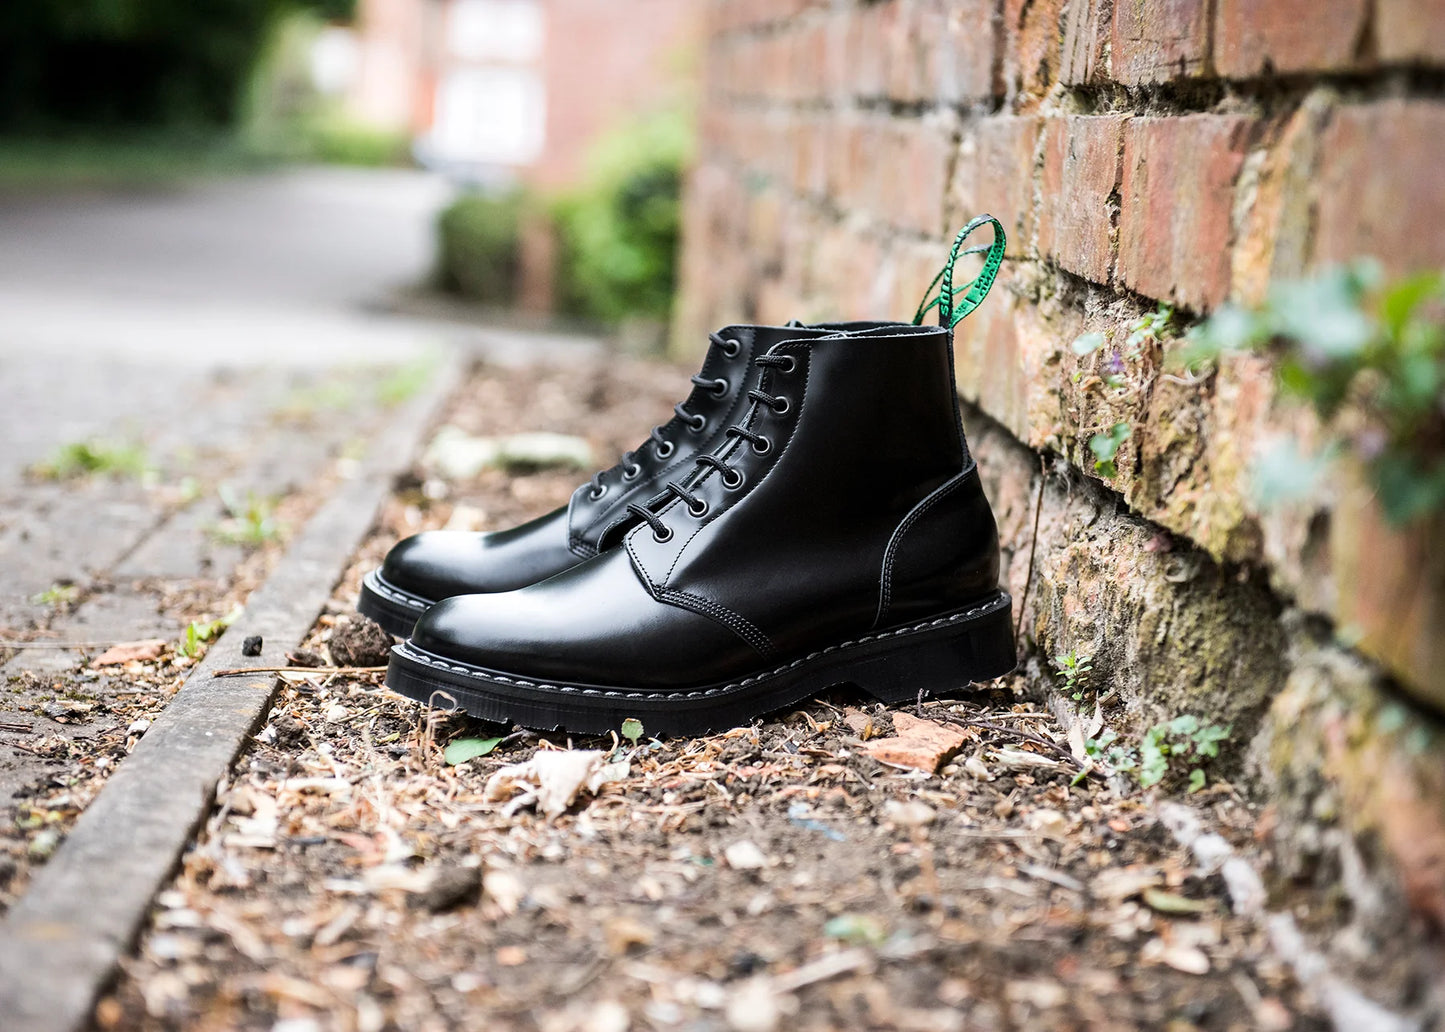 Solovair Derby Boots Black